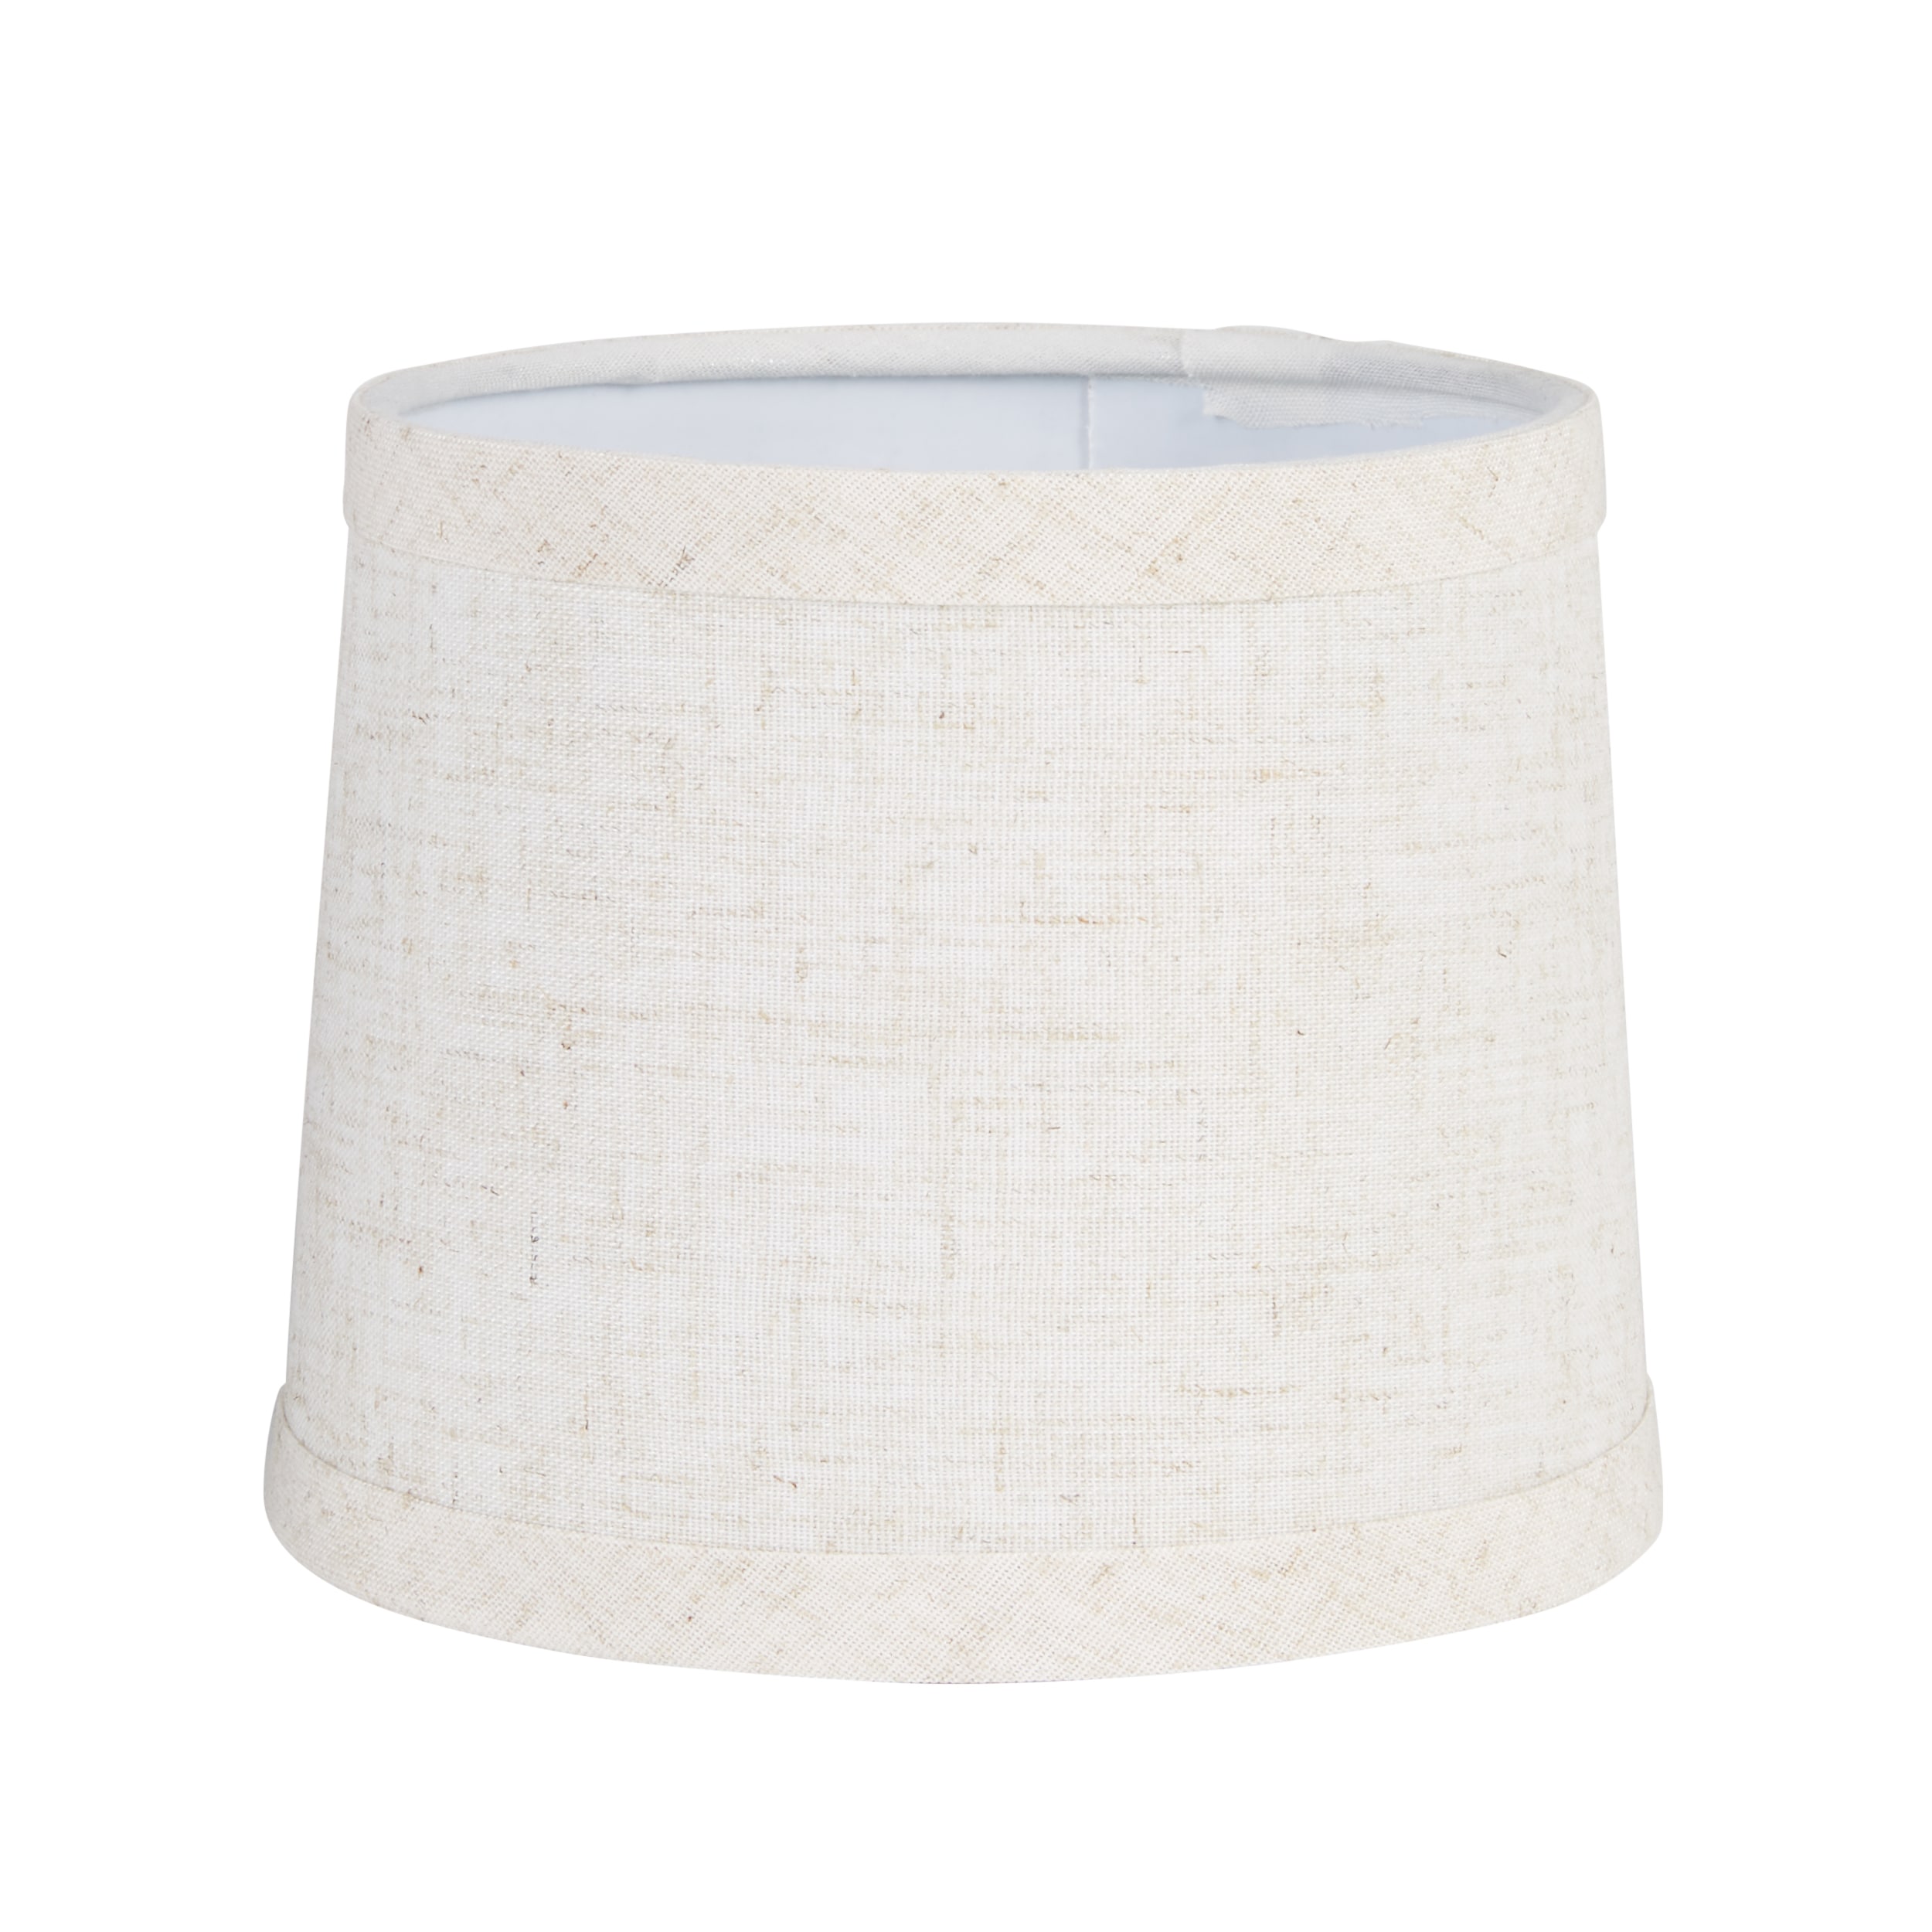 Small (3 - 6 inches) Lamp Shades at Lowes.com